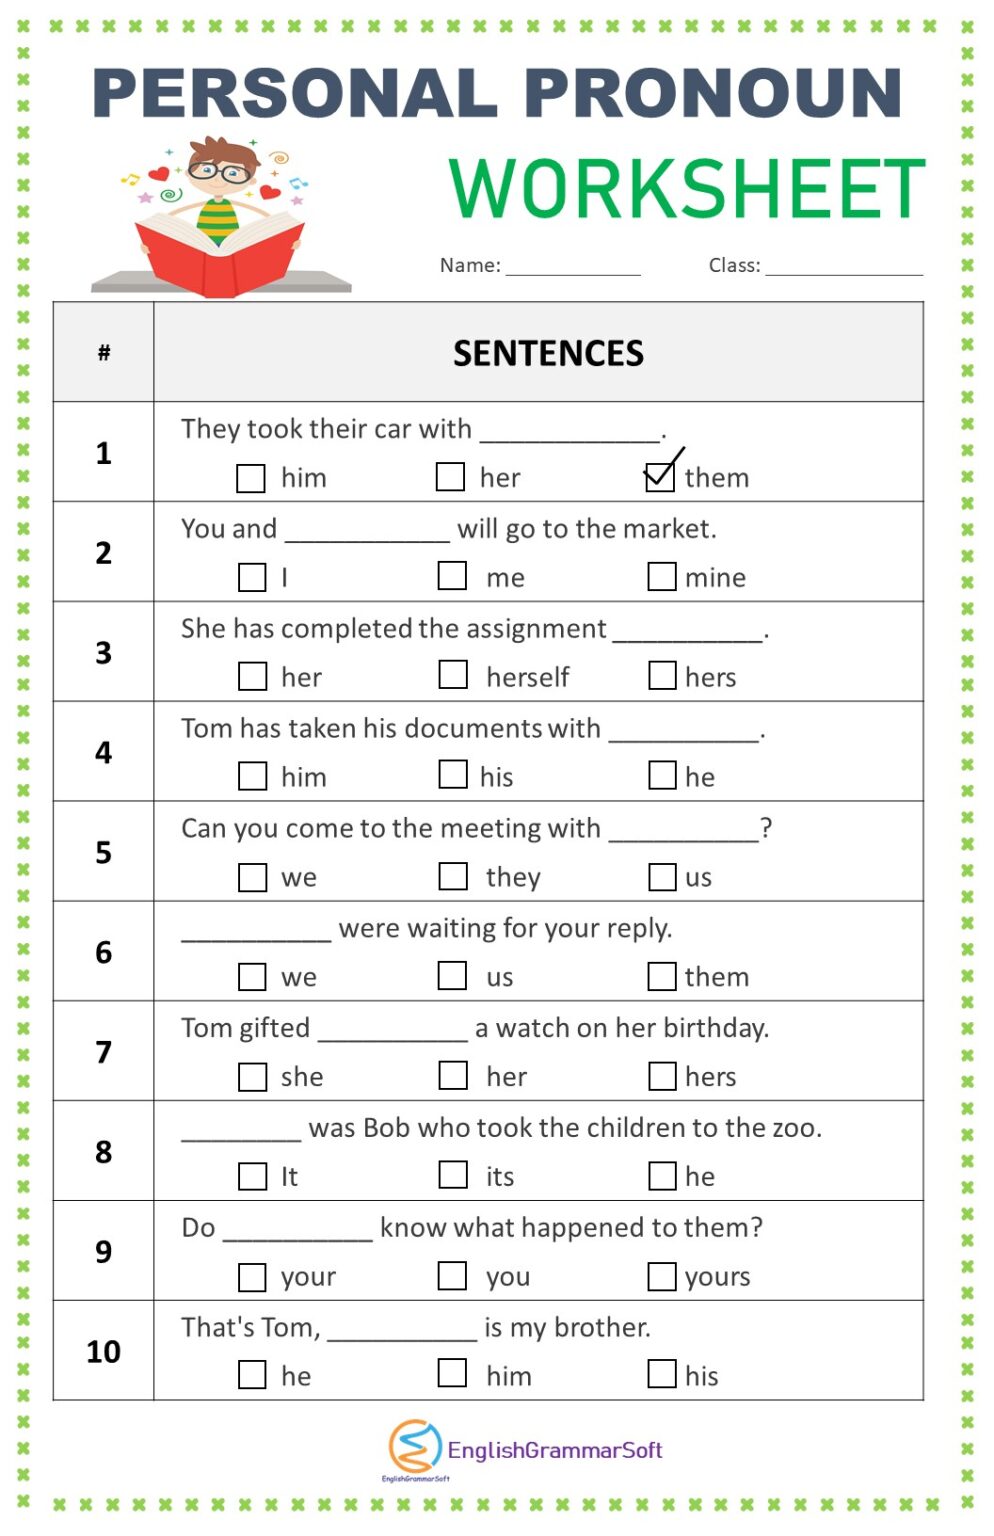 Worksheet 4 6 More On Persoanl Pronouns Prepostional Forms